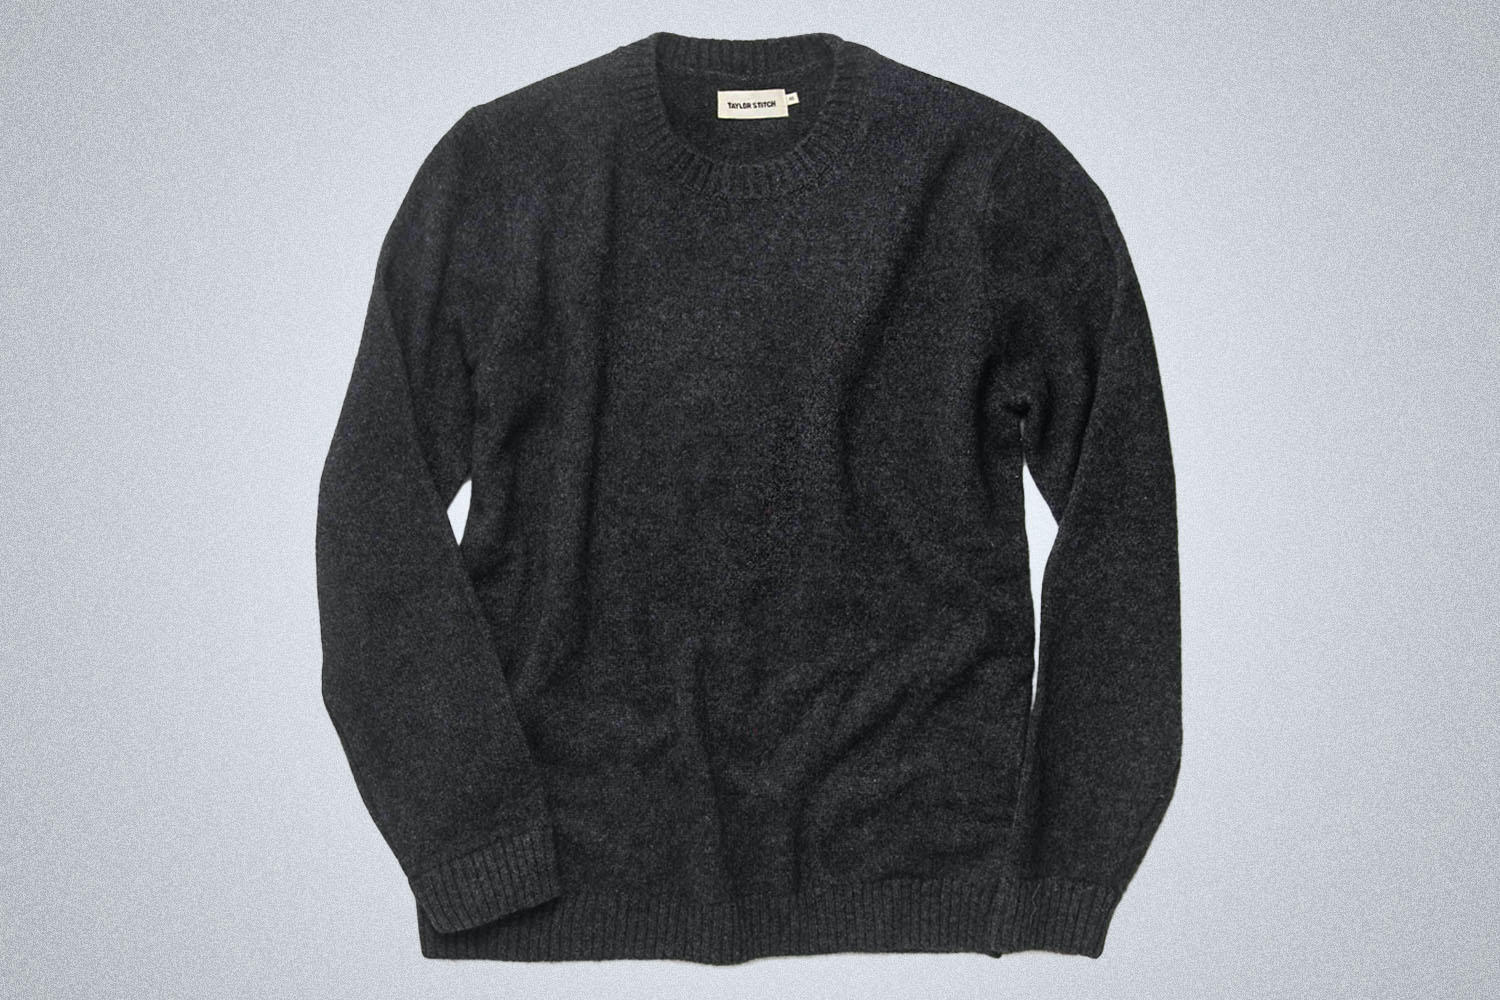 a handsome knit grey wool sweater